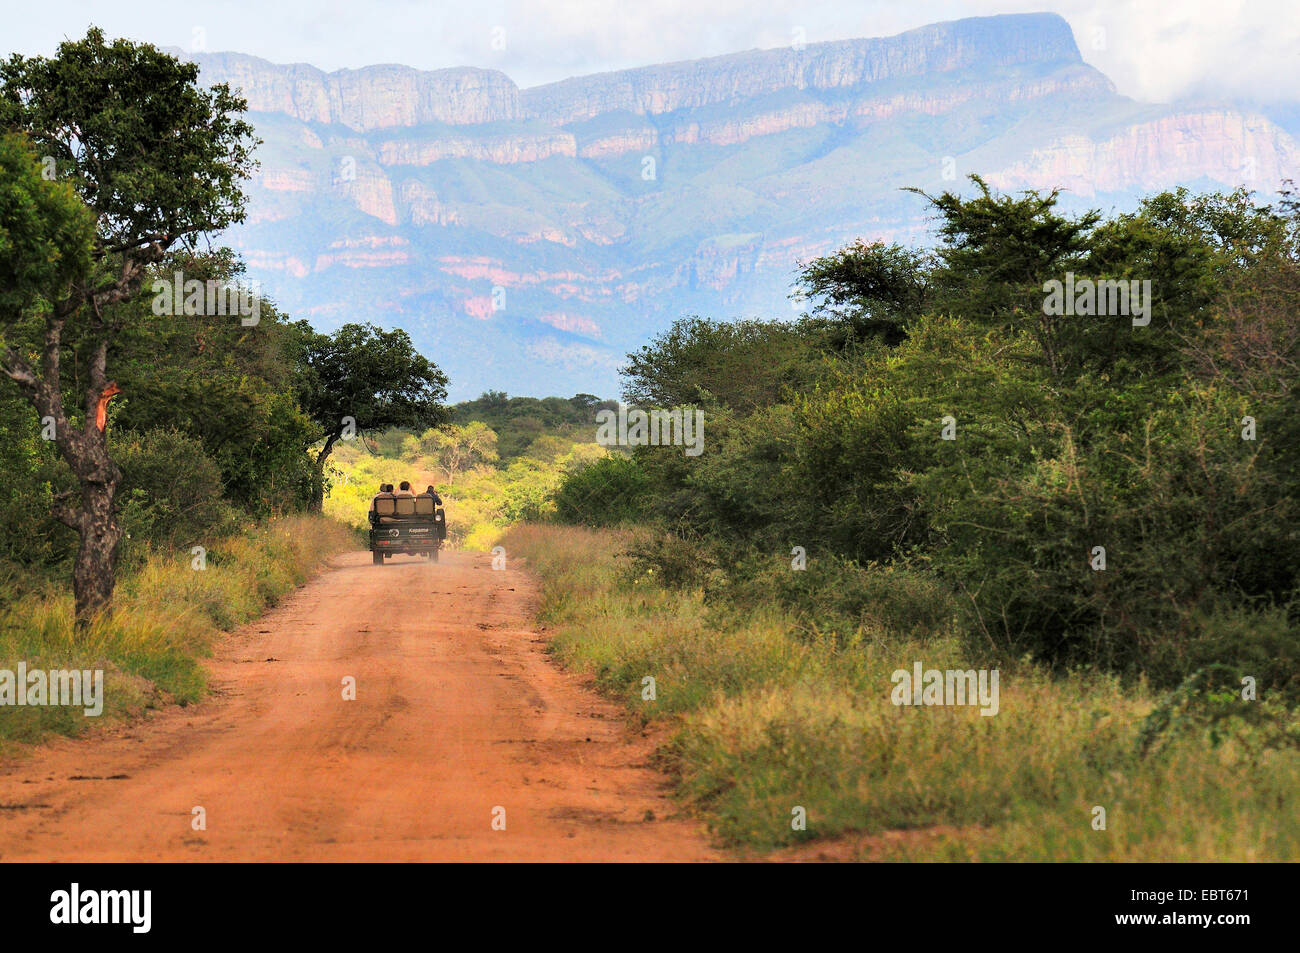 view of a road with car, Drakensberge in the bacaeground, South Africa, Krueger National Park Stock Photo